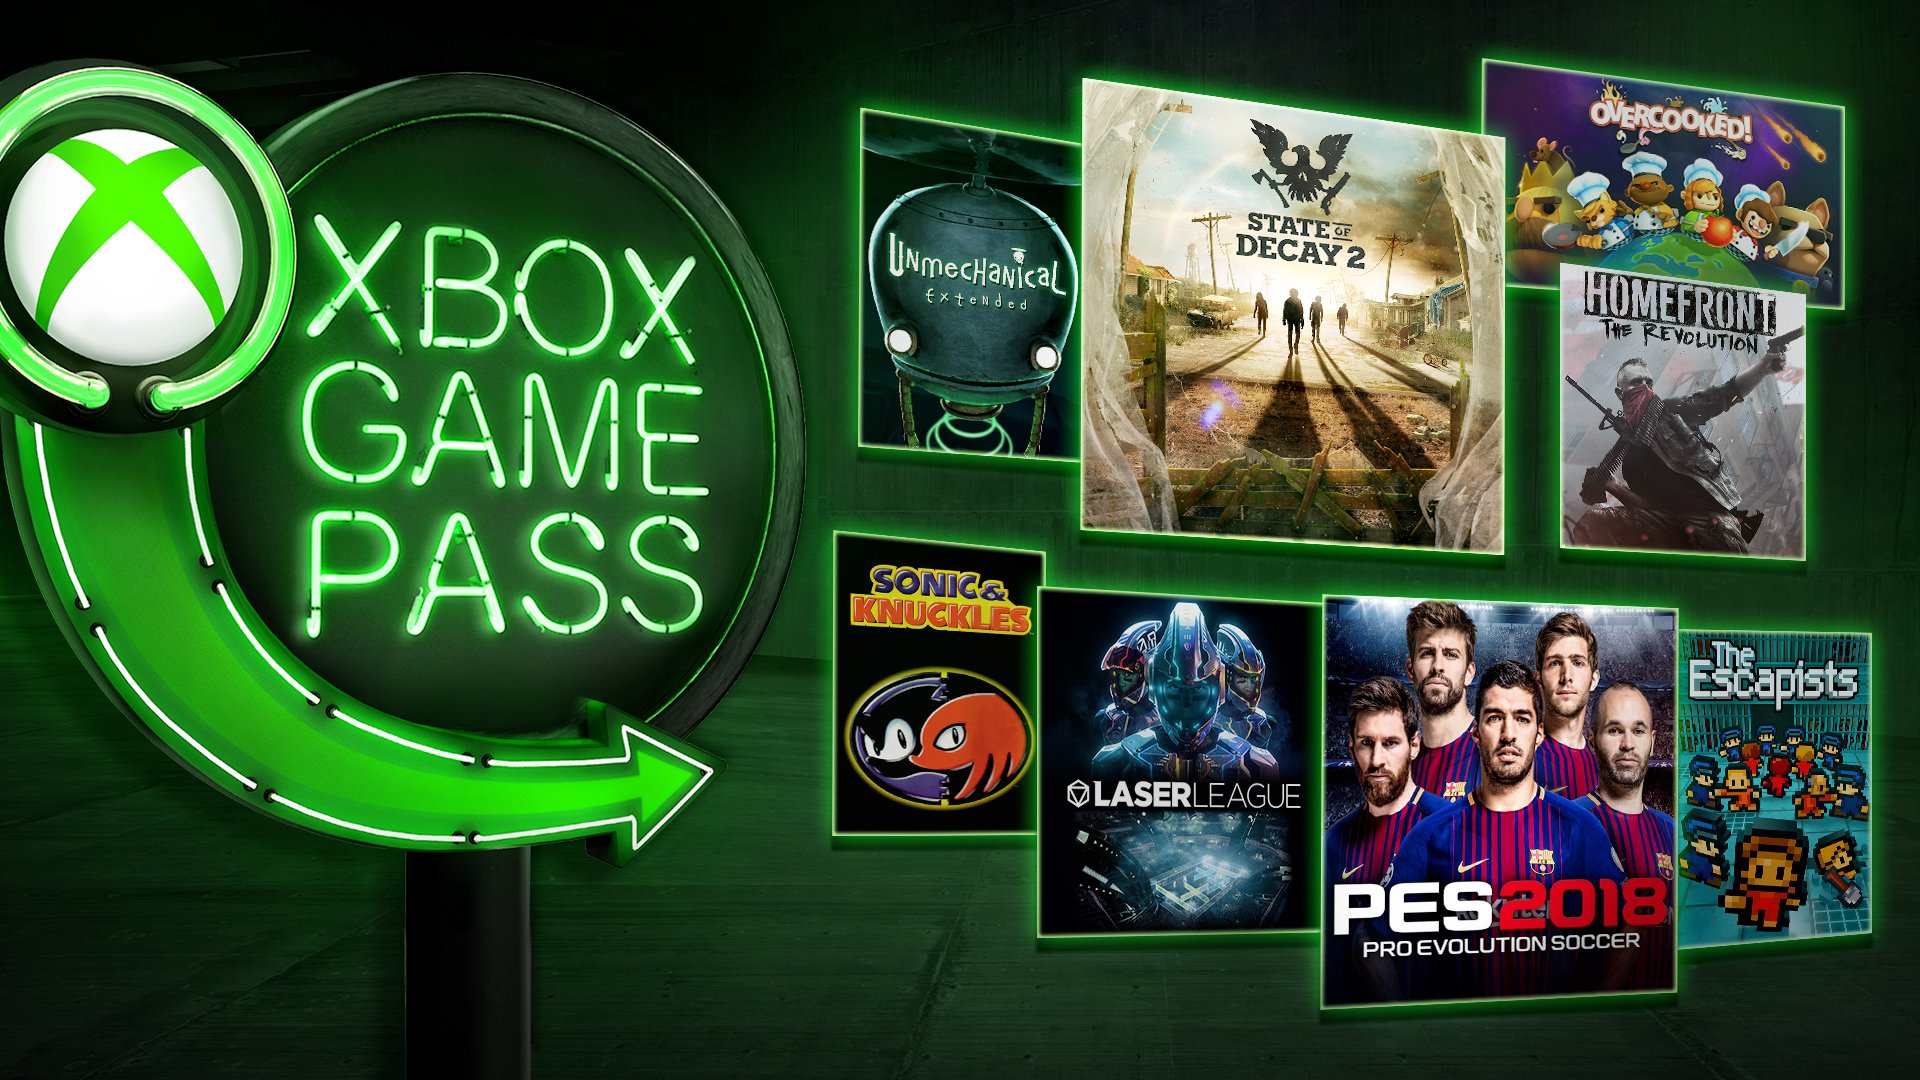 Xbox Game Pass already enjoys 'millions' of subscribers says Phil